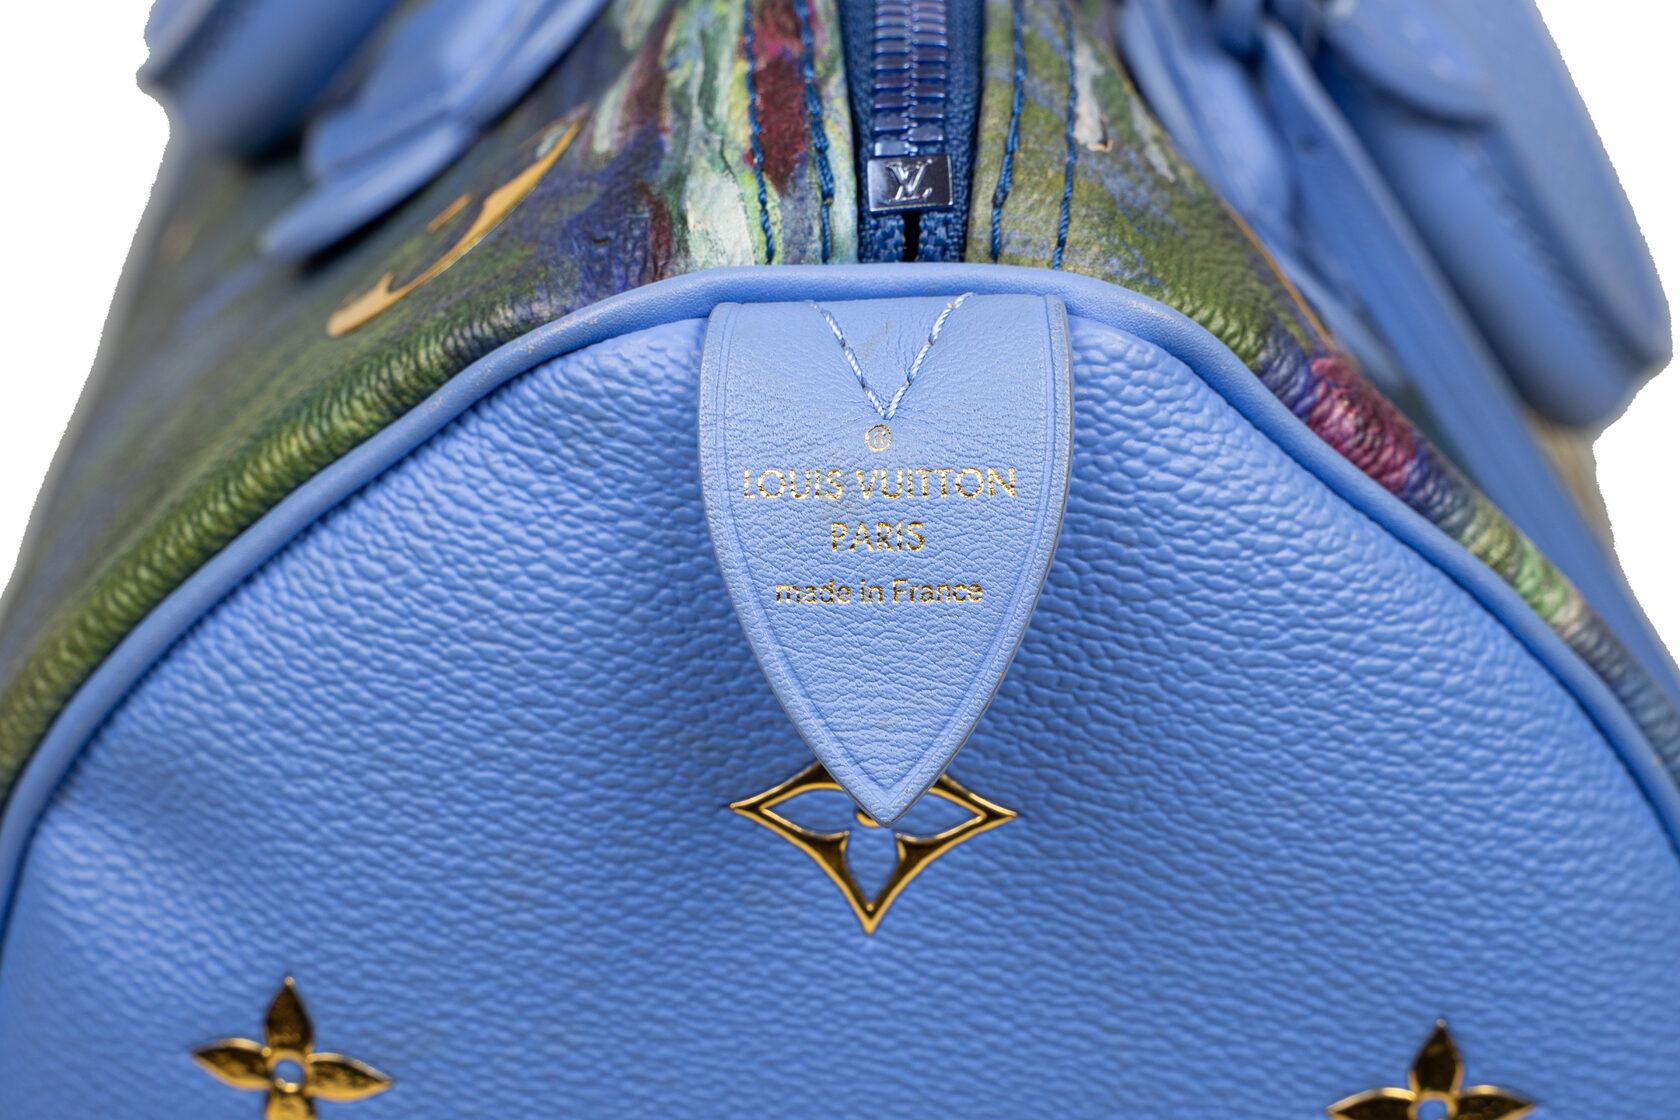 Louis Vuitton Speedy 30 Limited Edition with designer Jeff Coons - Claude Monet For Sale 10